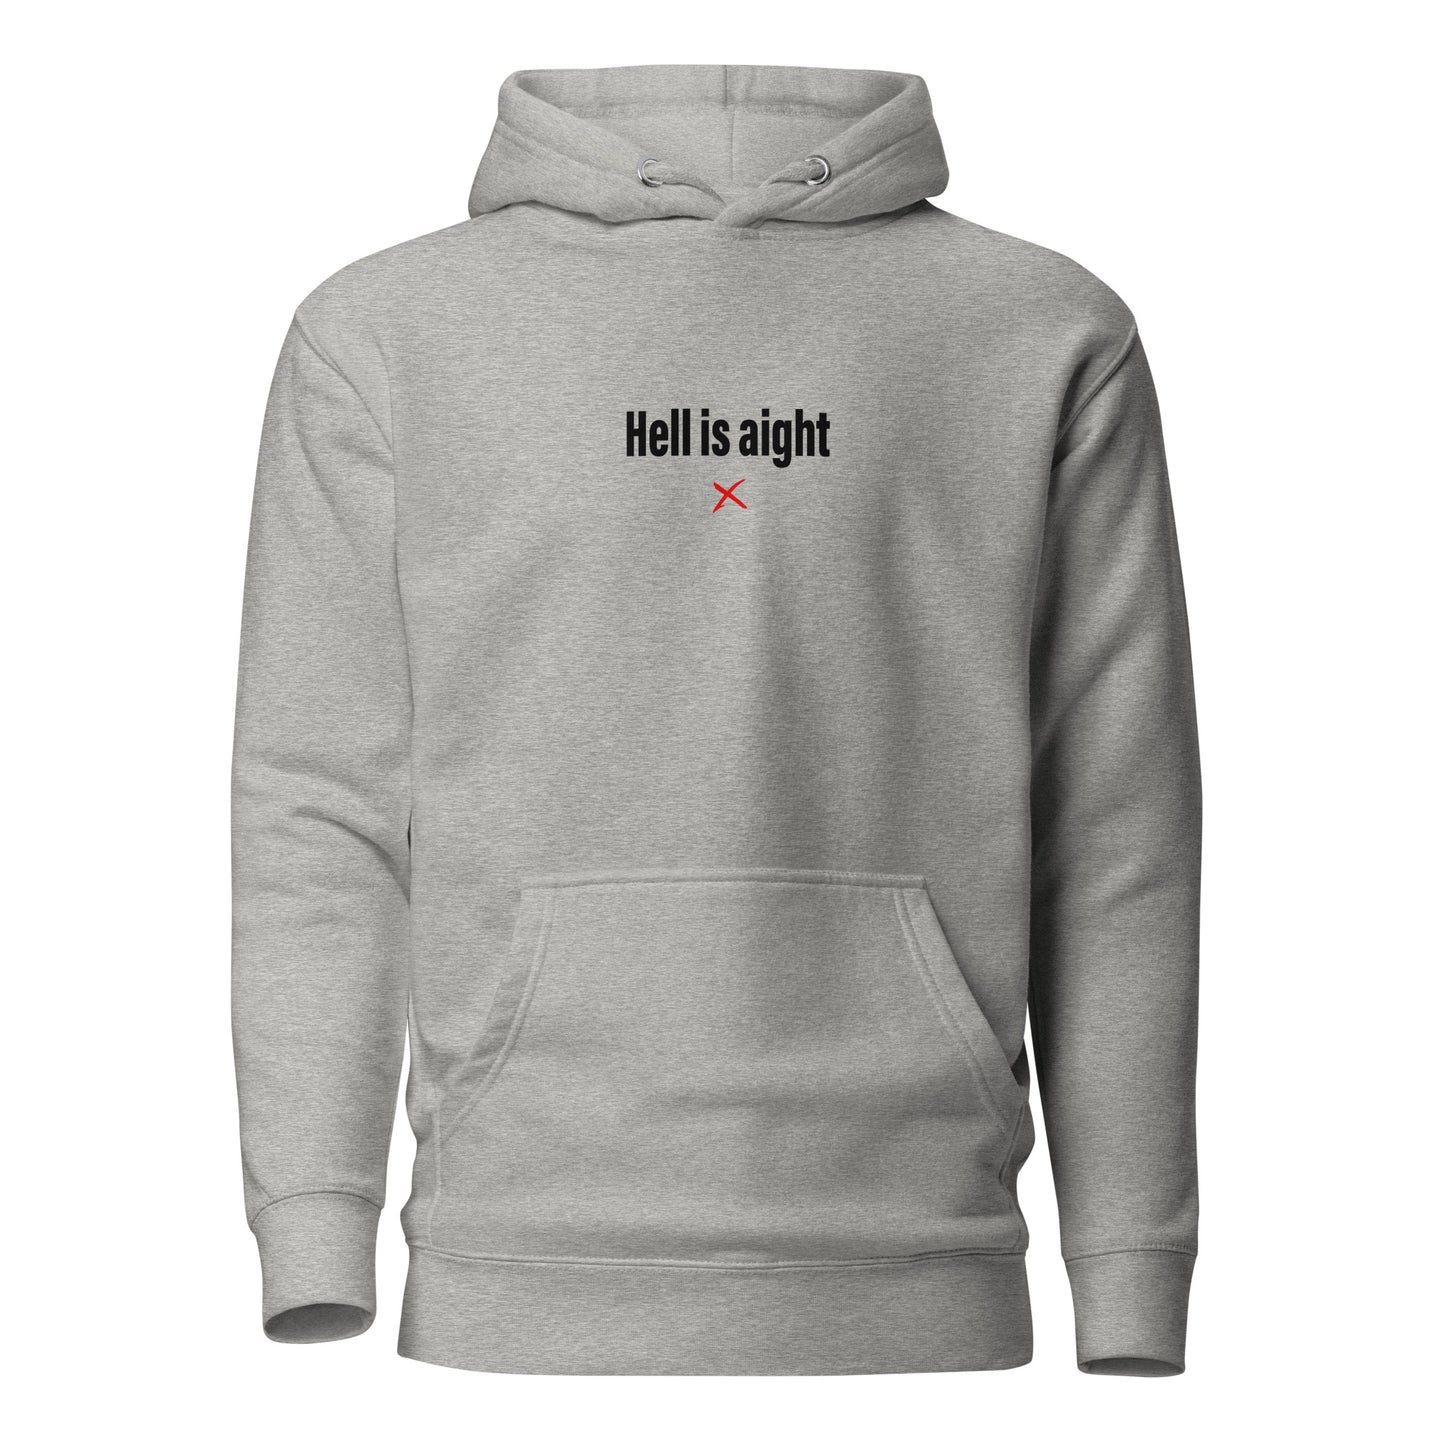 Hell is aight - Hoodie